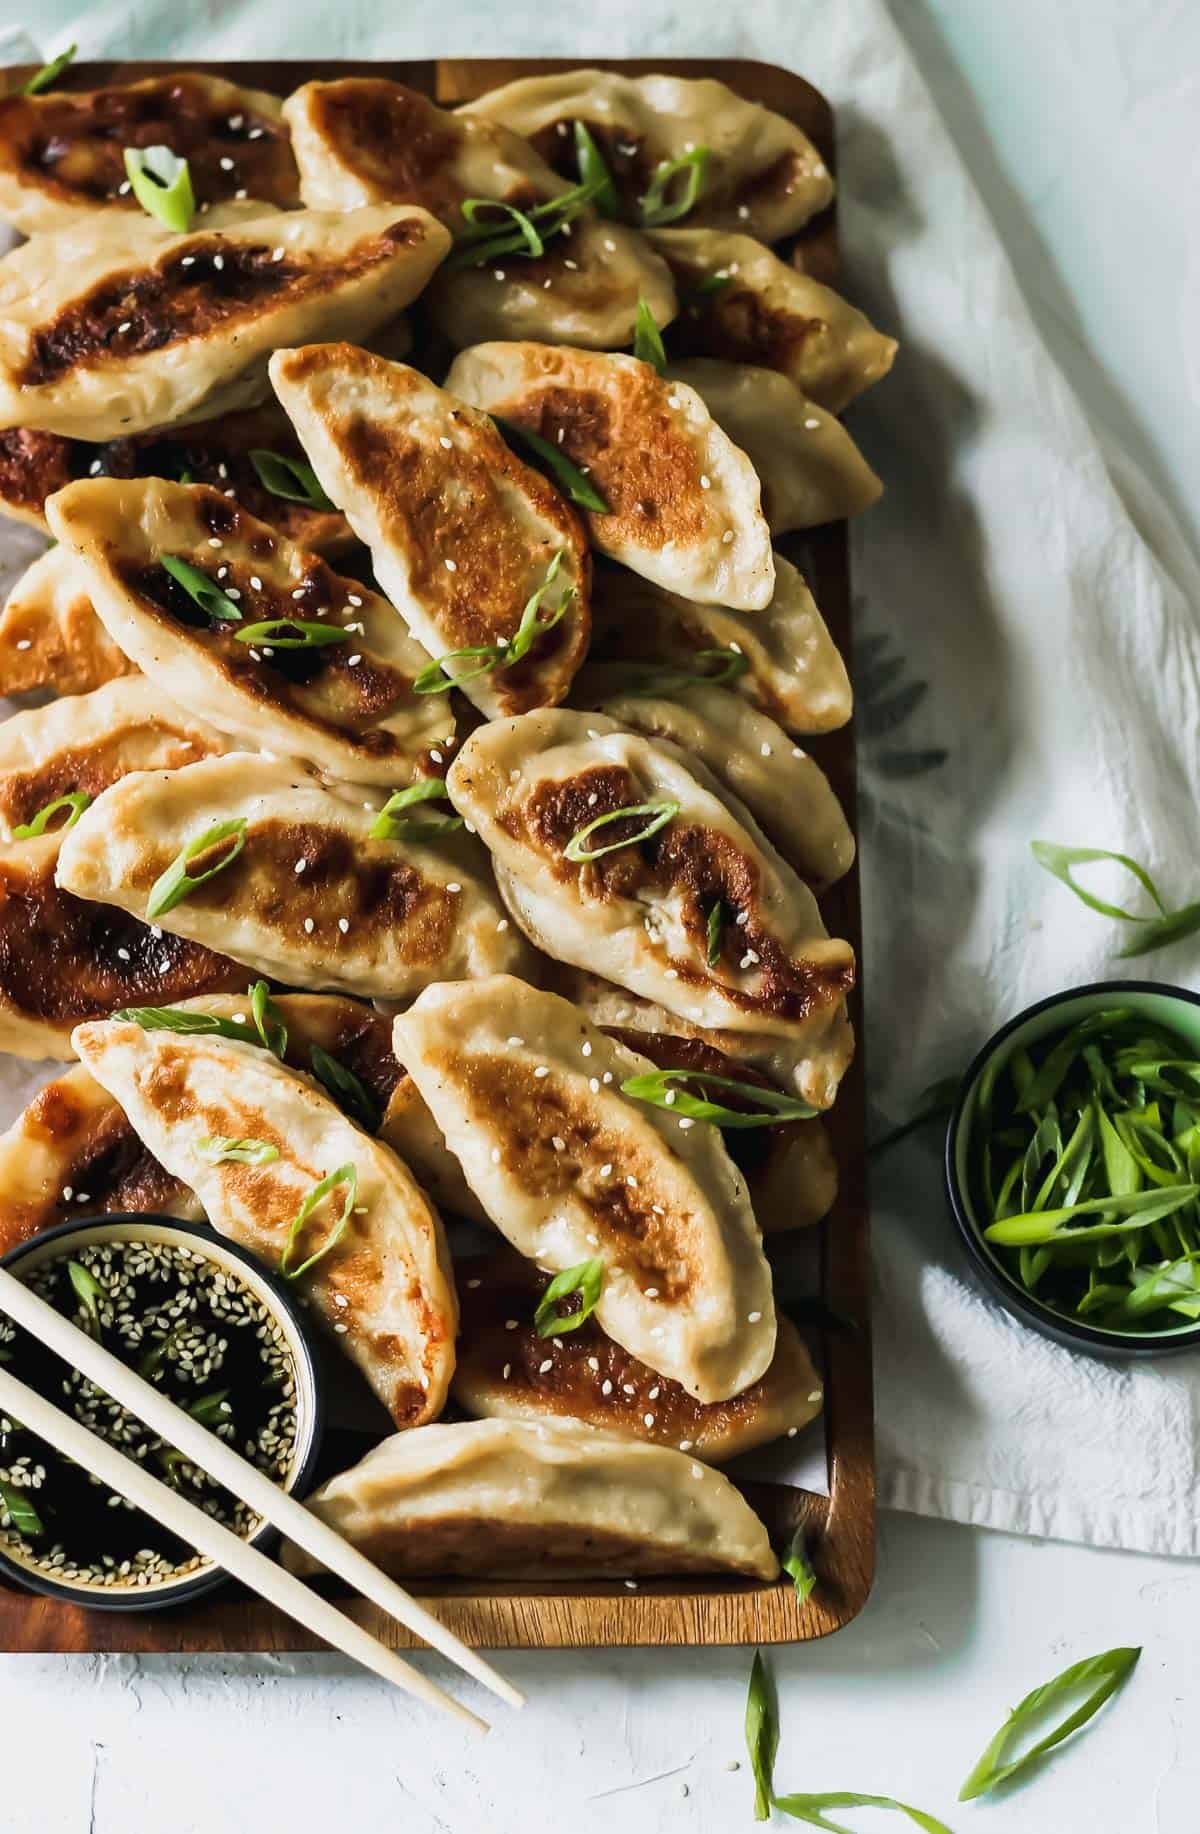 Chinese chicken dumplings with sesame soy sauce, chopsticks, and a bowl of scallions.